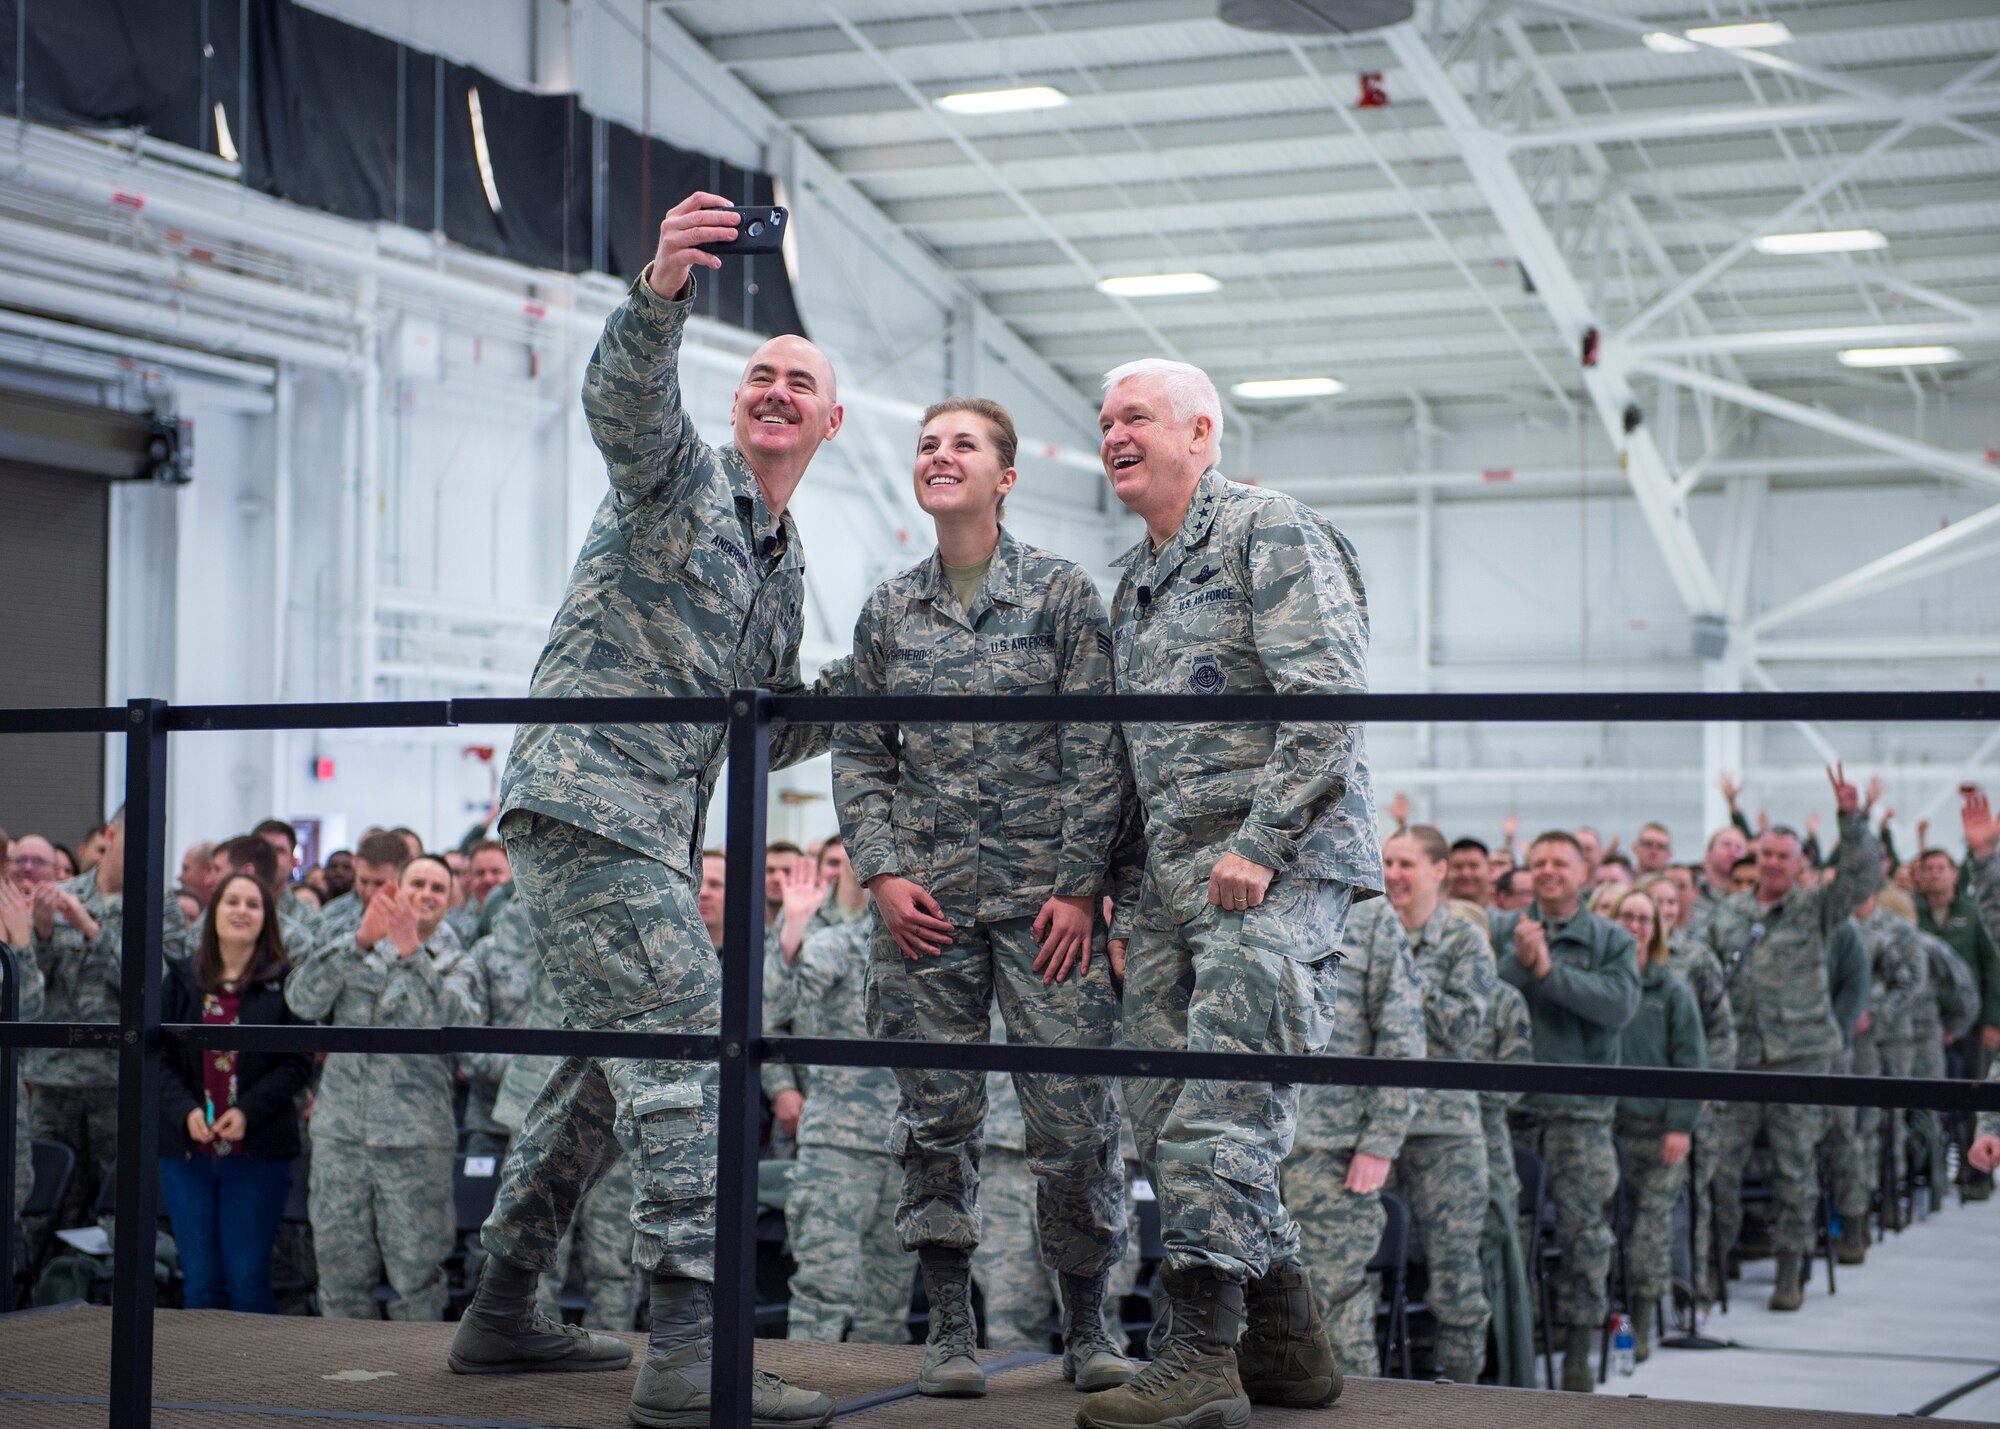 U.S. Air Force Senior Airman Paige Shepherd, 133rd Medical Group, takes a photo with Lt. Gen. L. Scott Rice, right, director, Air National Guard, and Chief Master Sgt. Ronald Anderson, left, Command Chief of the Air National Guard in St. Paul, Minn., March 25, 2018.